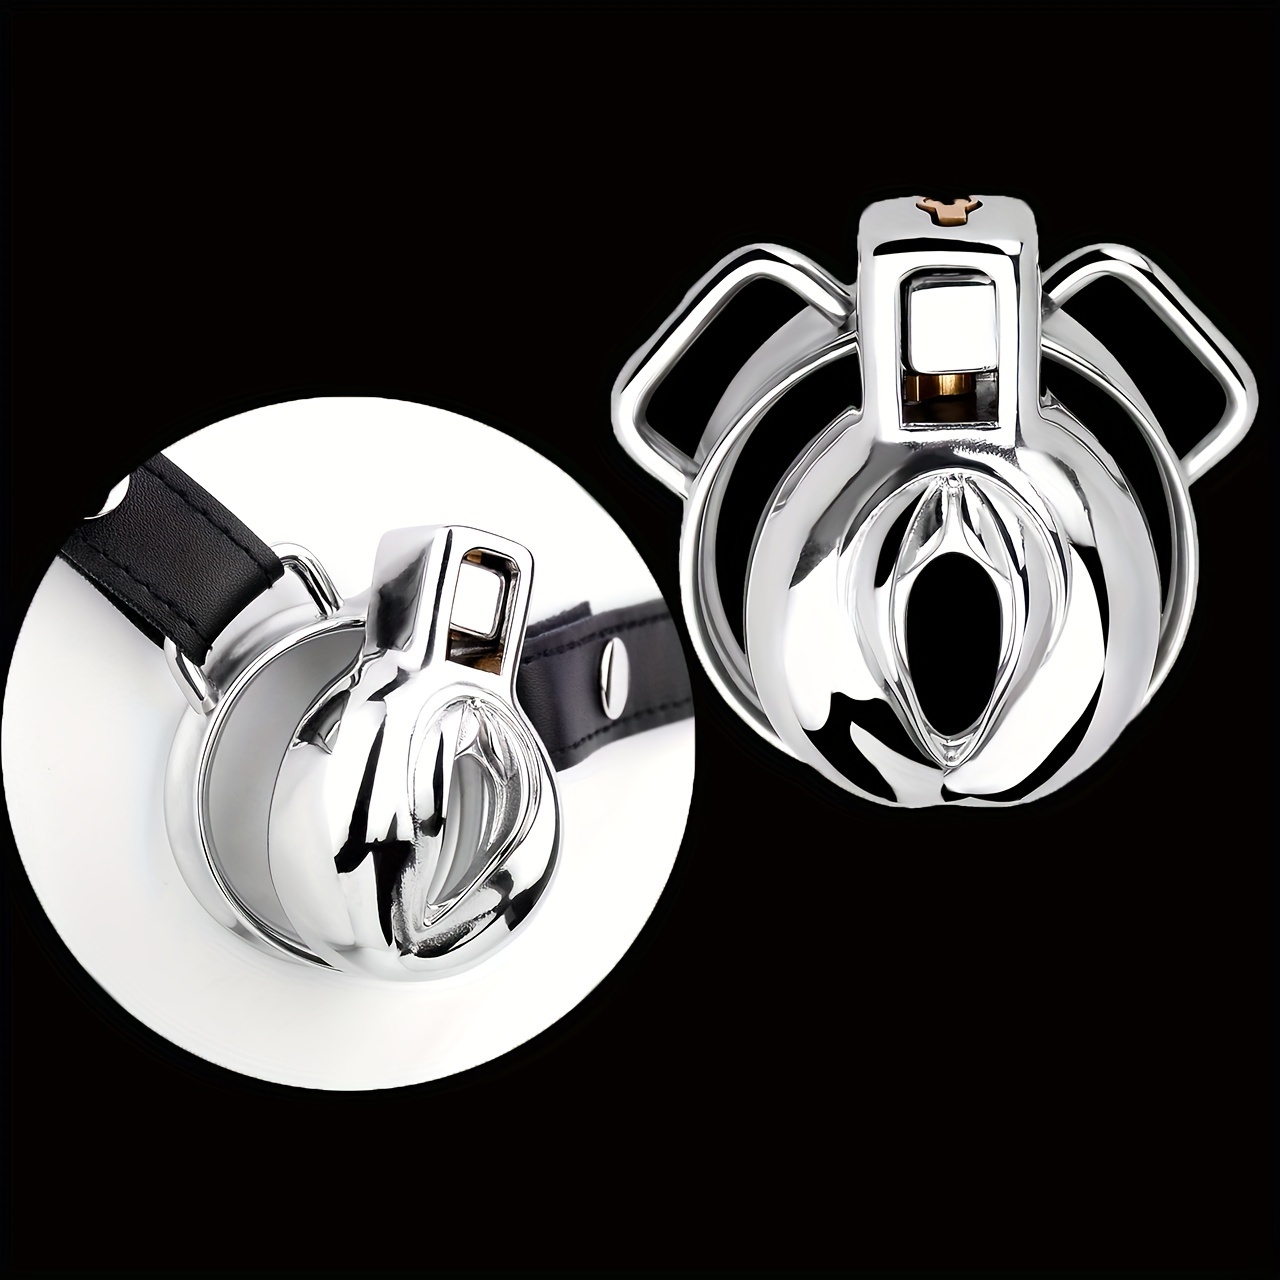 Chastity Devices Jeusn Male Chastity Cage Sex Toys Discreet Sissy Femboy  Chastity Cock Cage Device Penis Rings Male With 3 Size Men'S Adult Goods